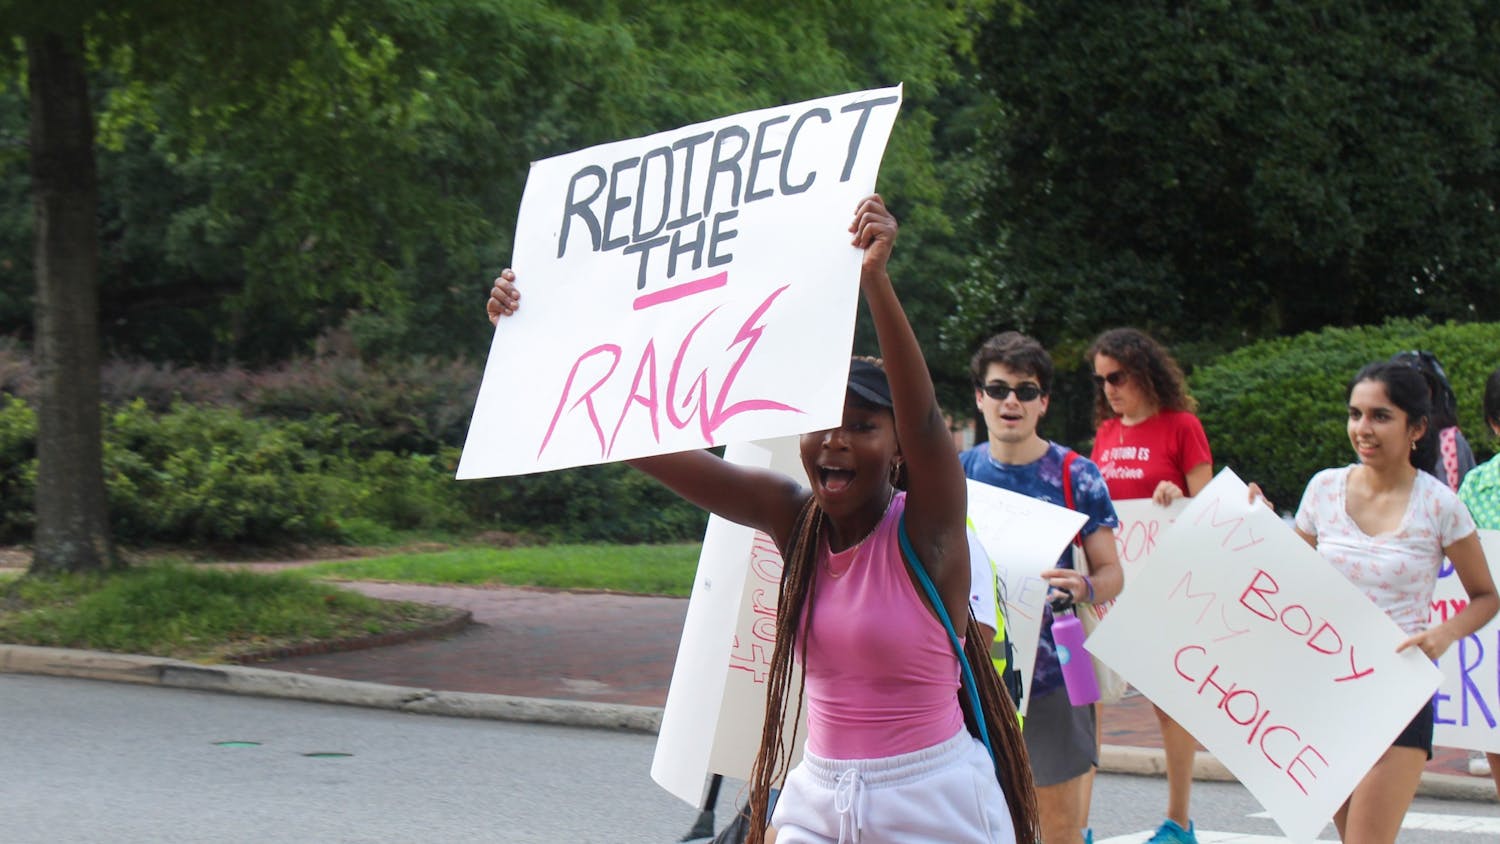 Redirect the Rage Protest